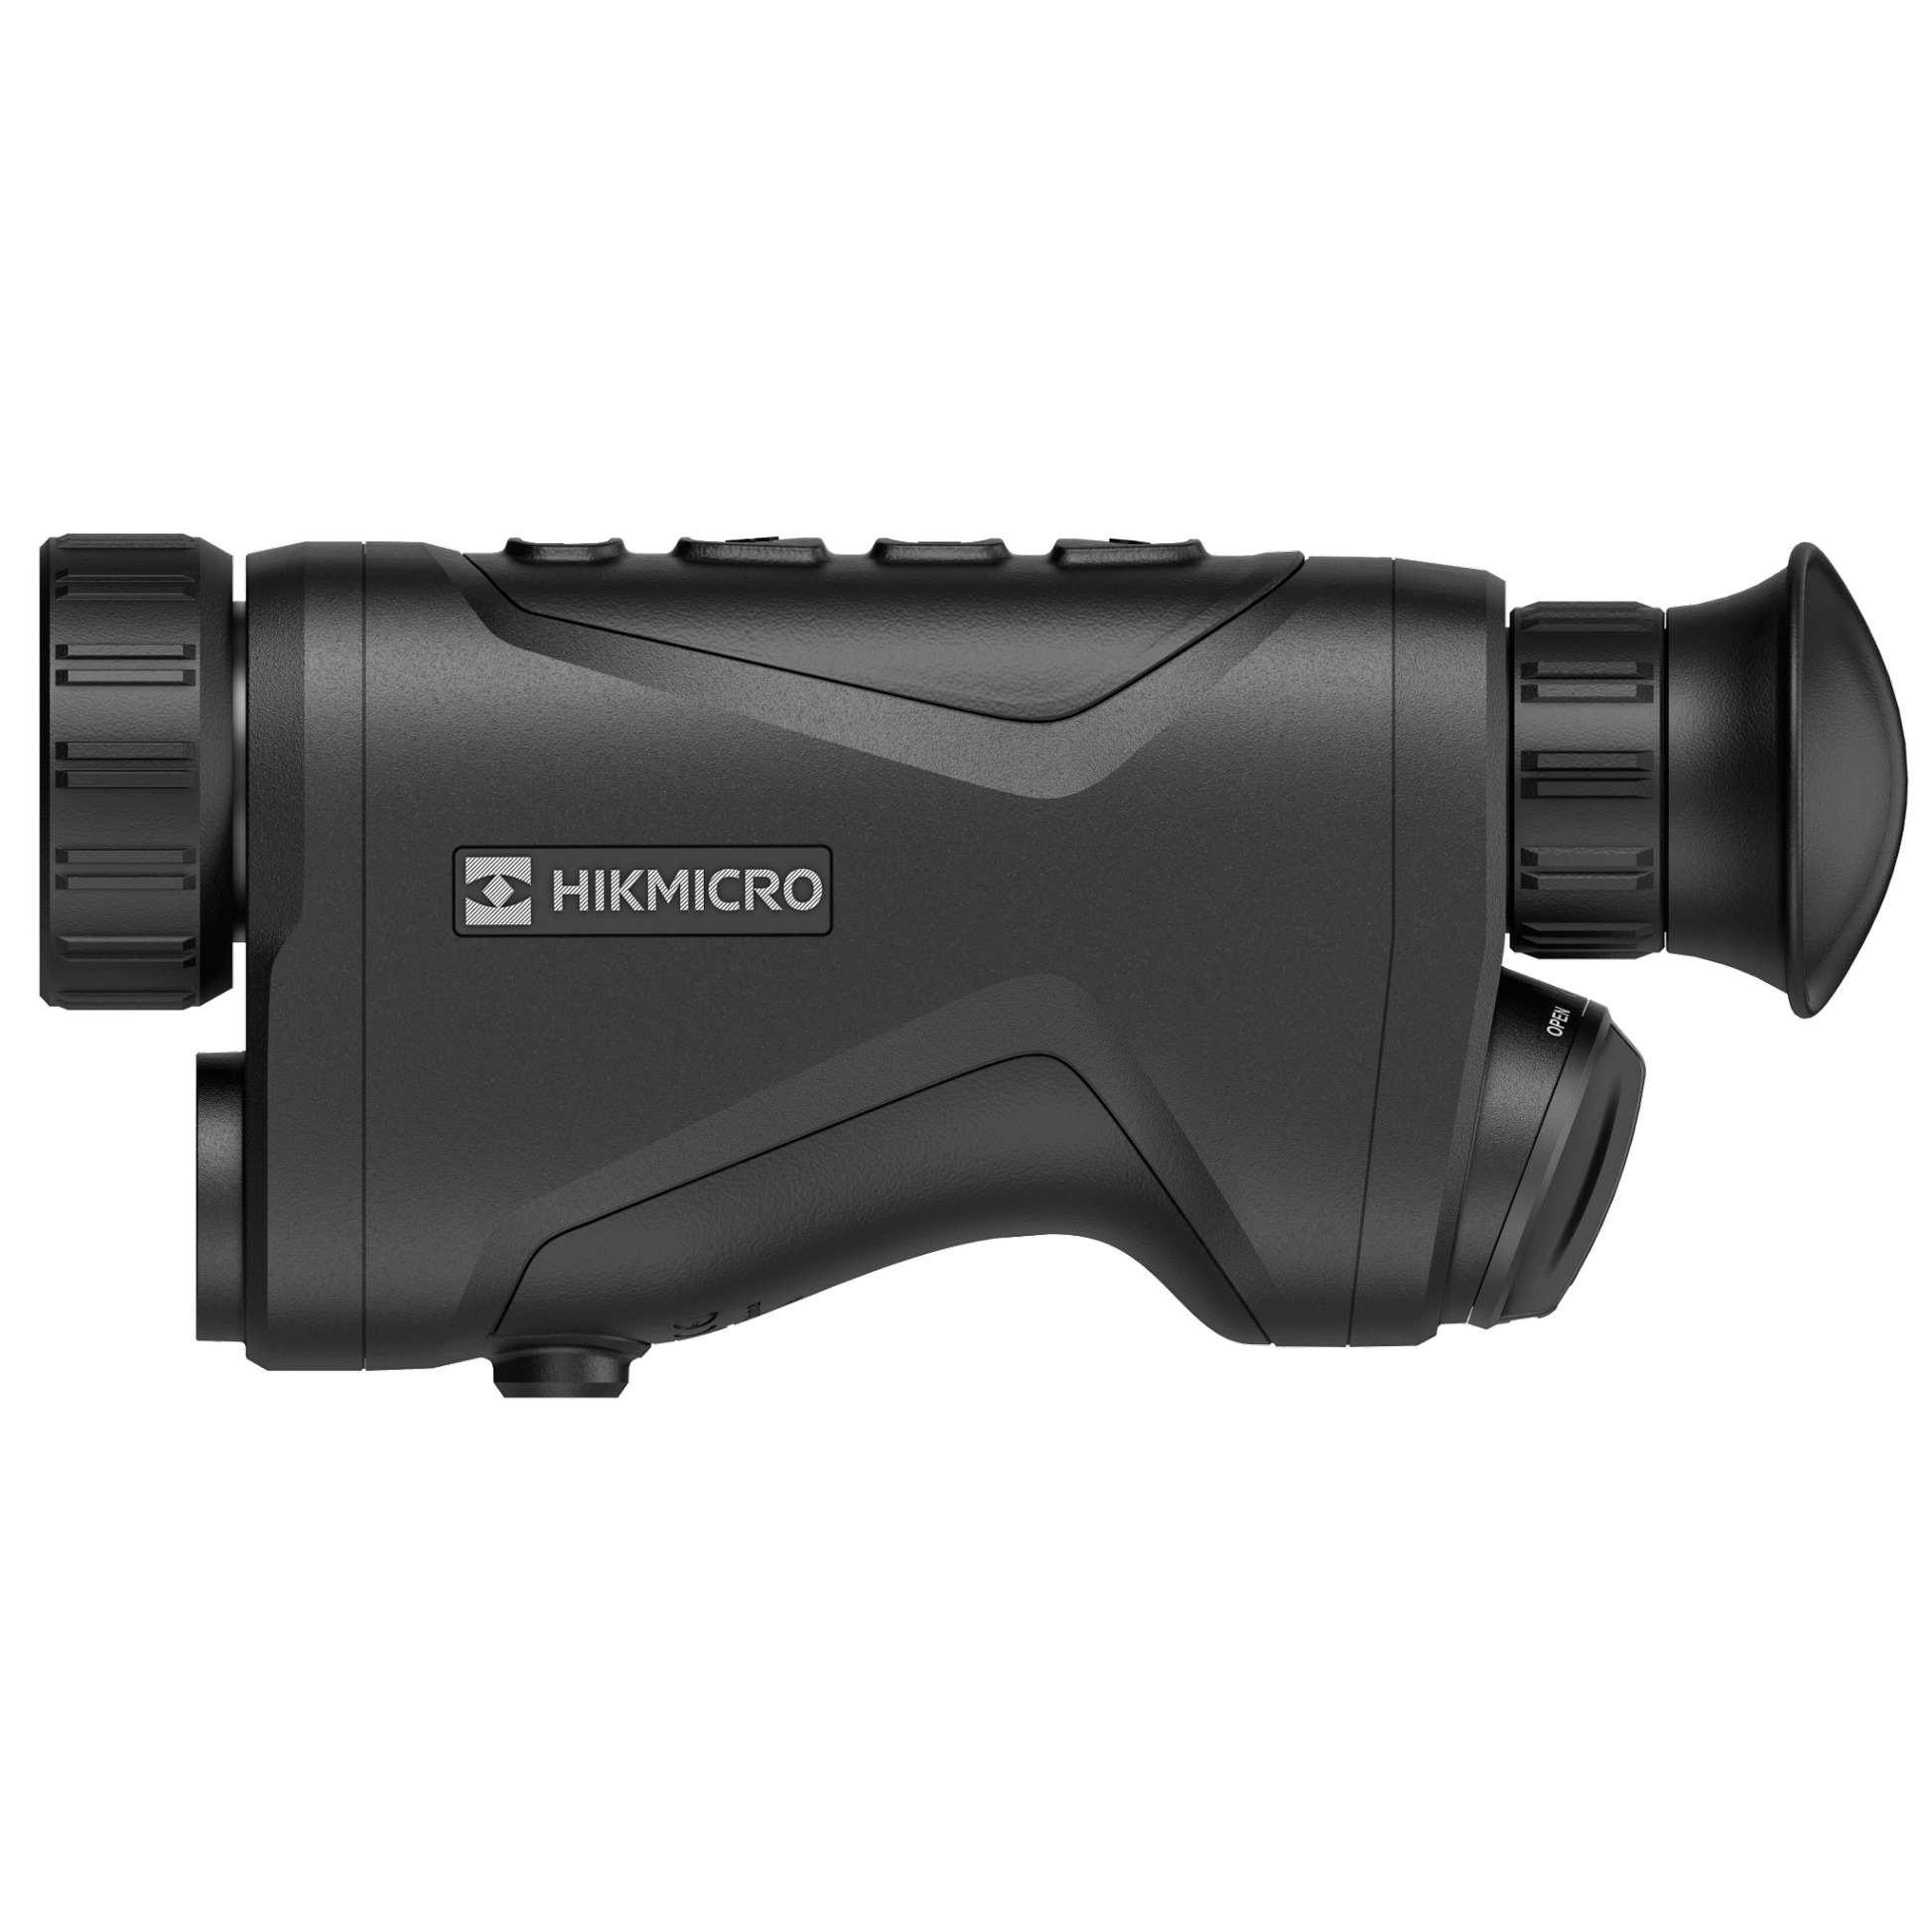 Side view of the HikMicro Condor CQ35L thermal monocular, showcasing the HikMicro branding on its sleek black body. The device features adjustment knobs on both ends and an ergonomic grip, indicating its user-friendly design for hunting and security surveillance.